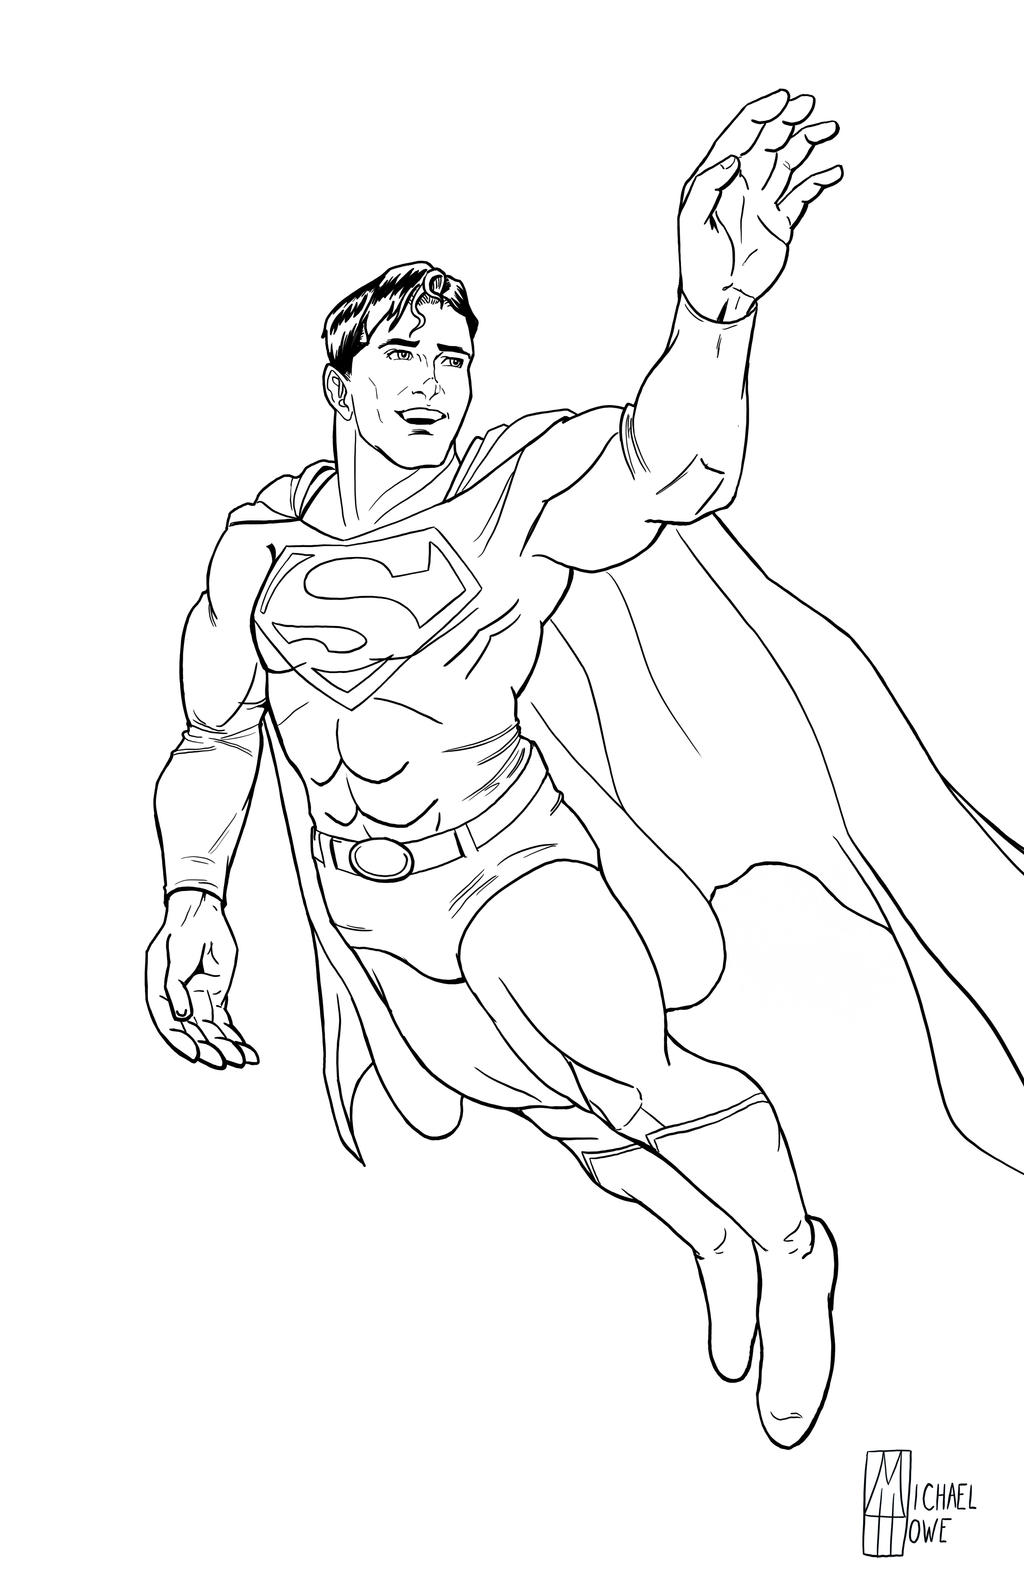 Superman coloring page by michaelhowearts on